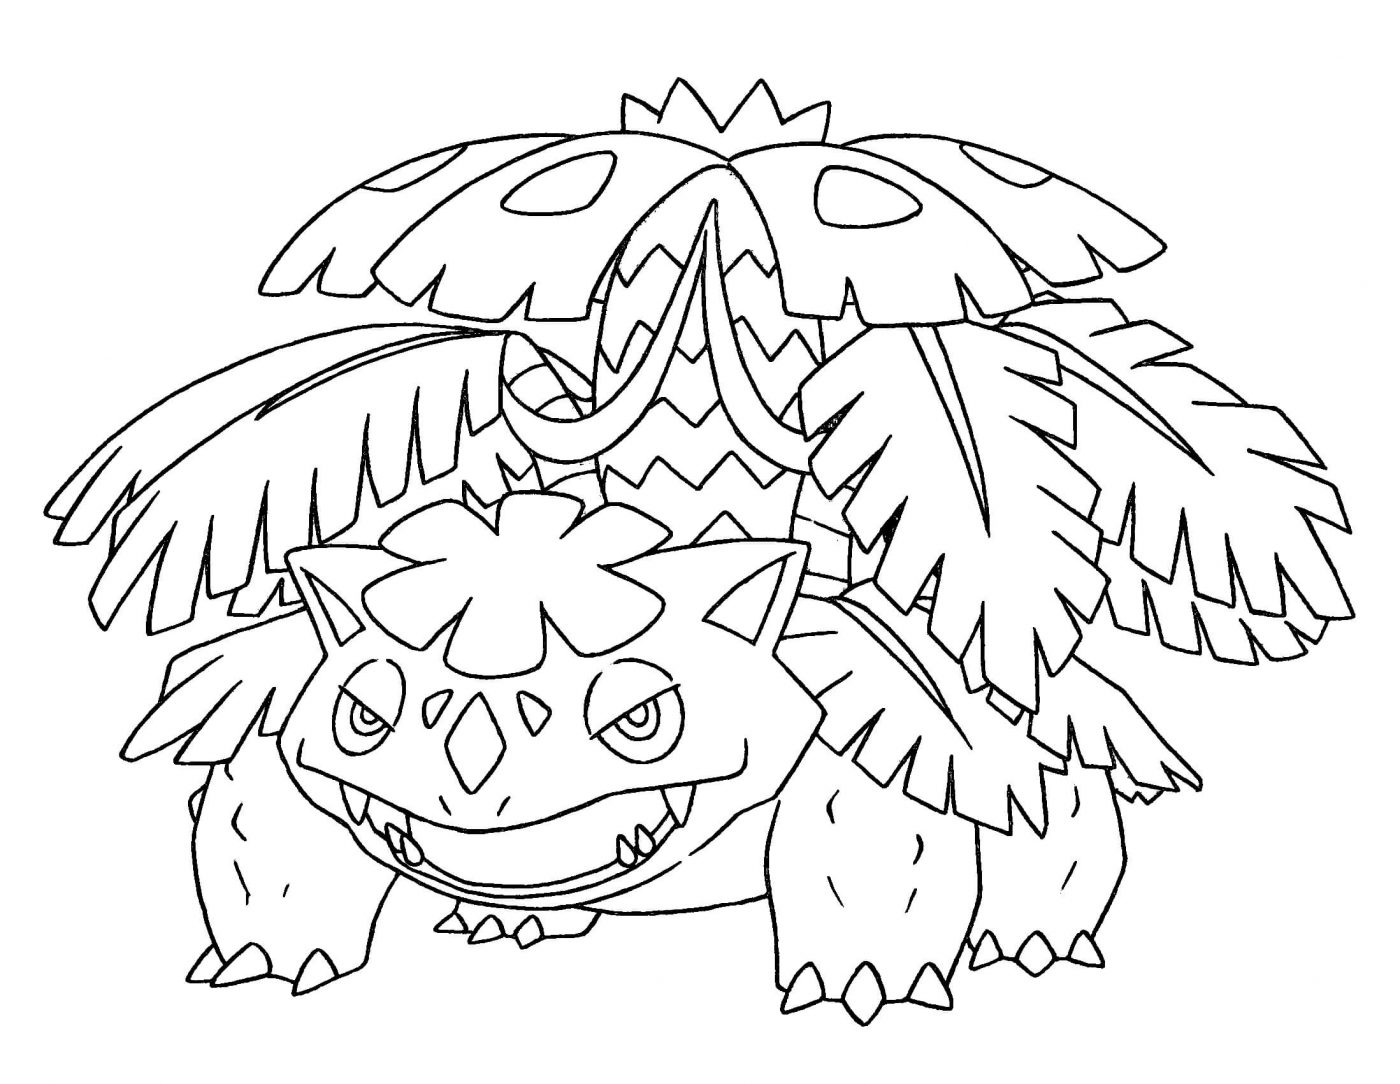 Sceptile Coloring Page at GetColorings.com | Free printable colorings